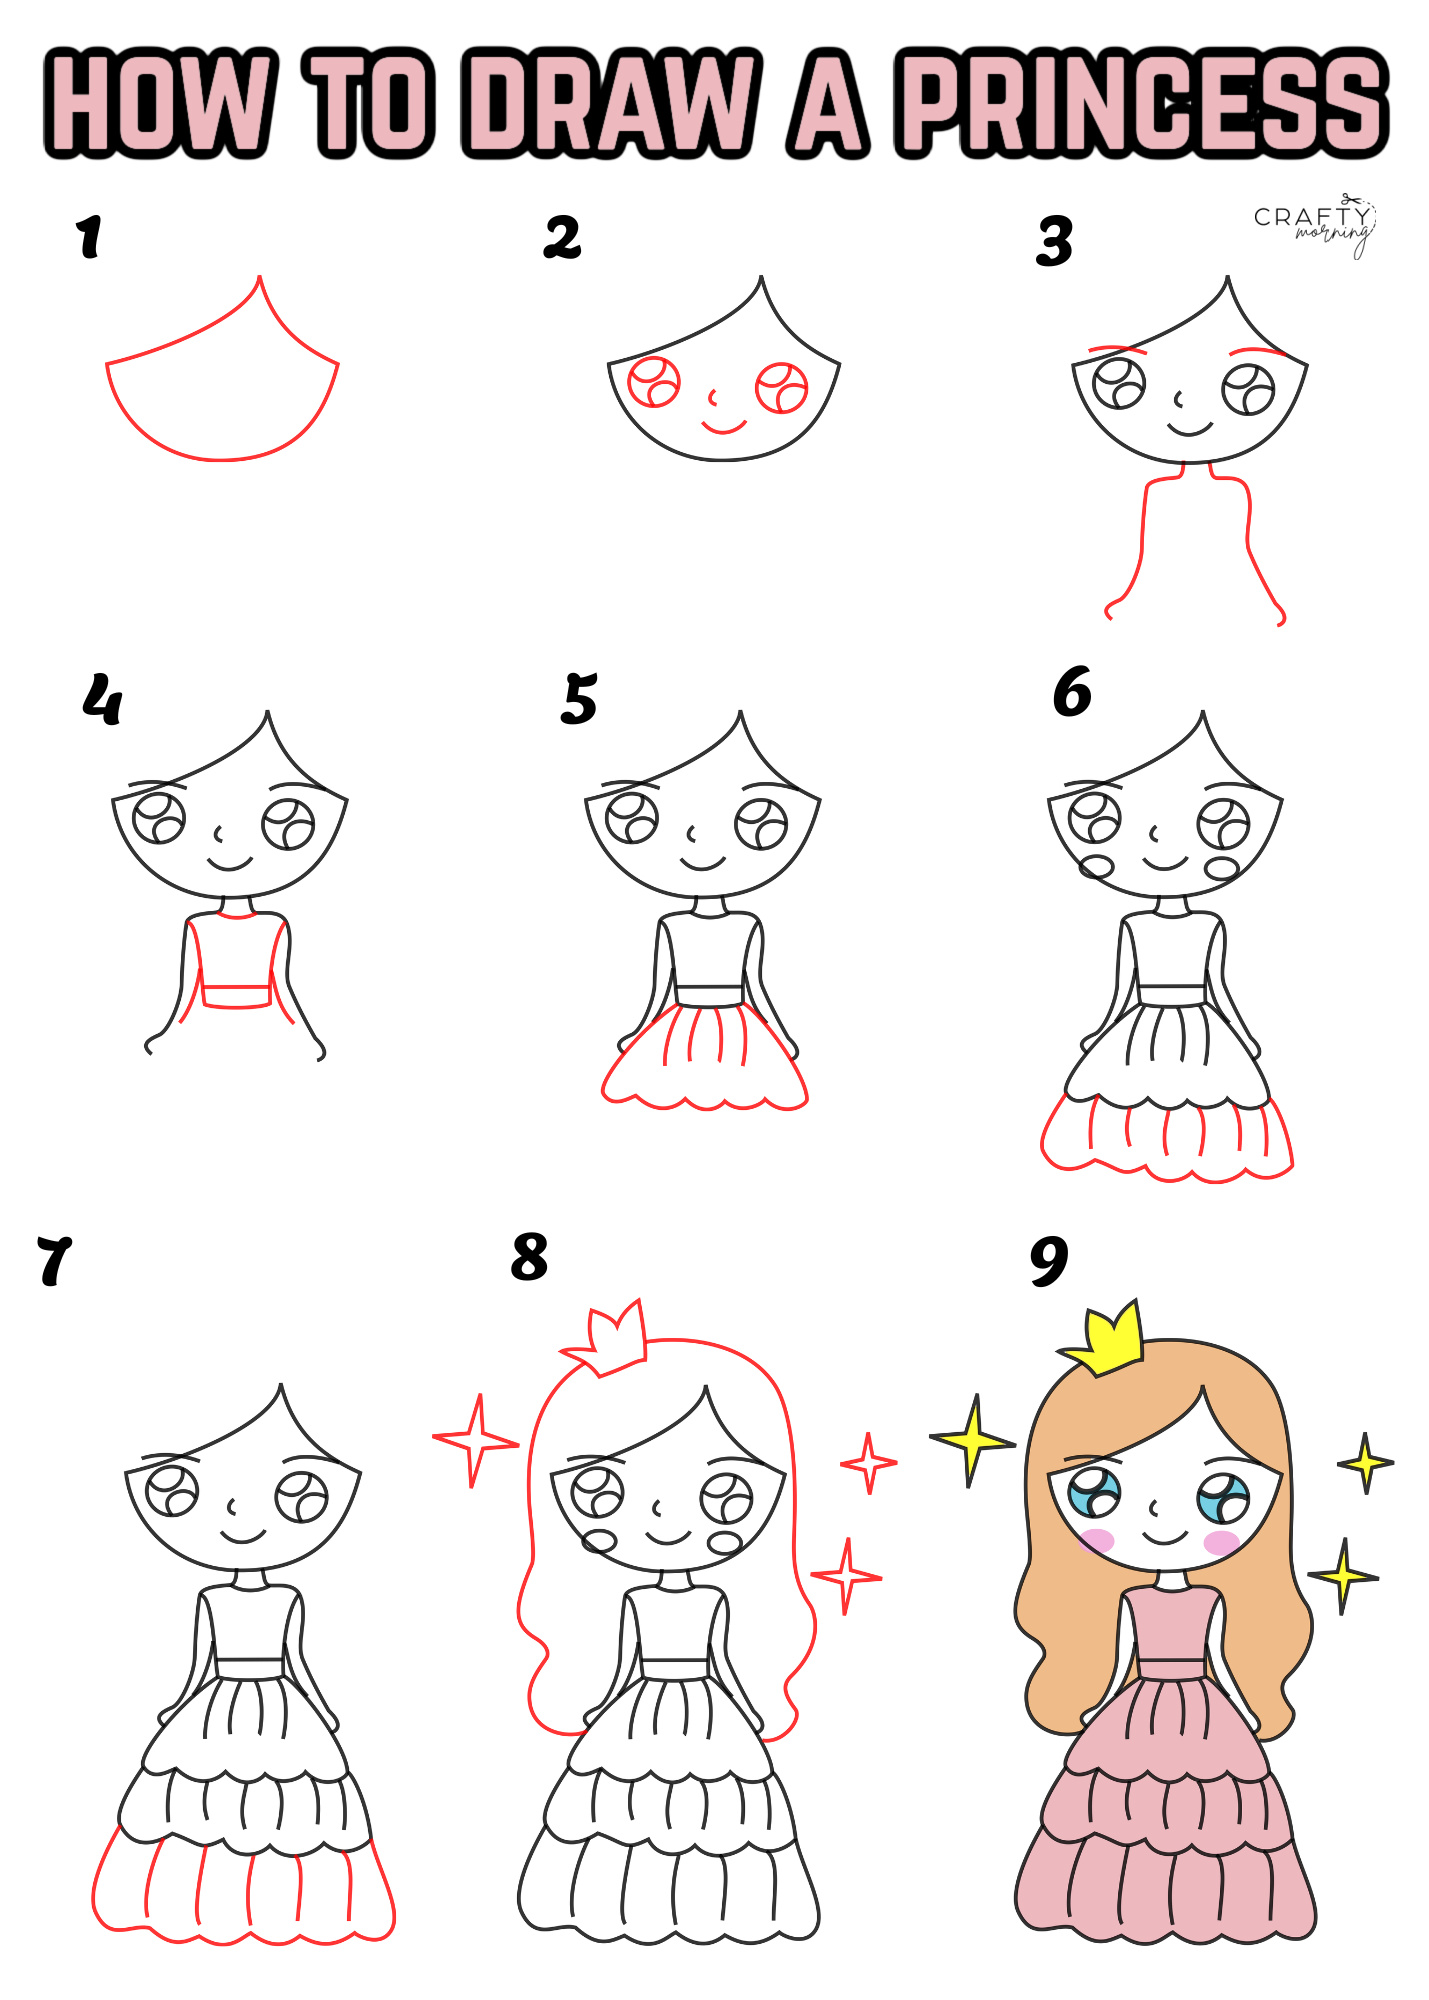 How to Draw a Princess - Really Easy Drawing Tutorial